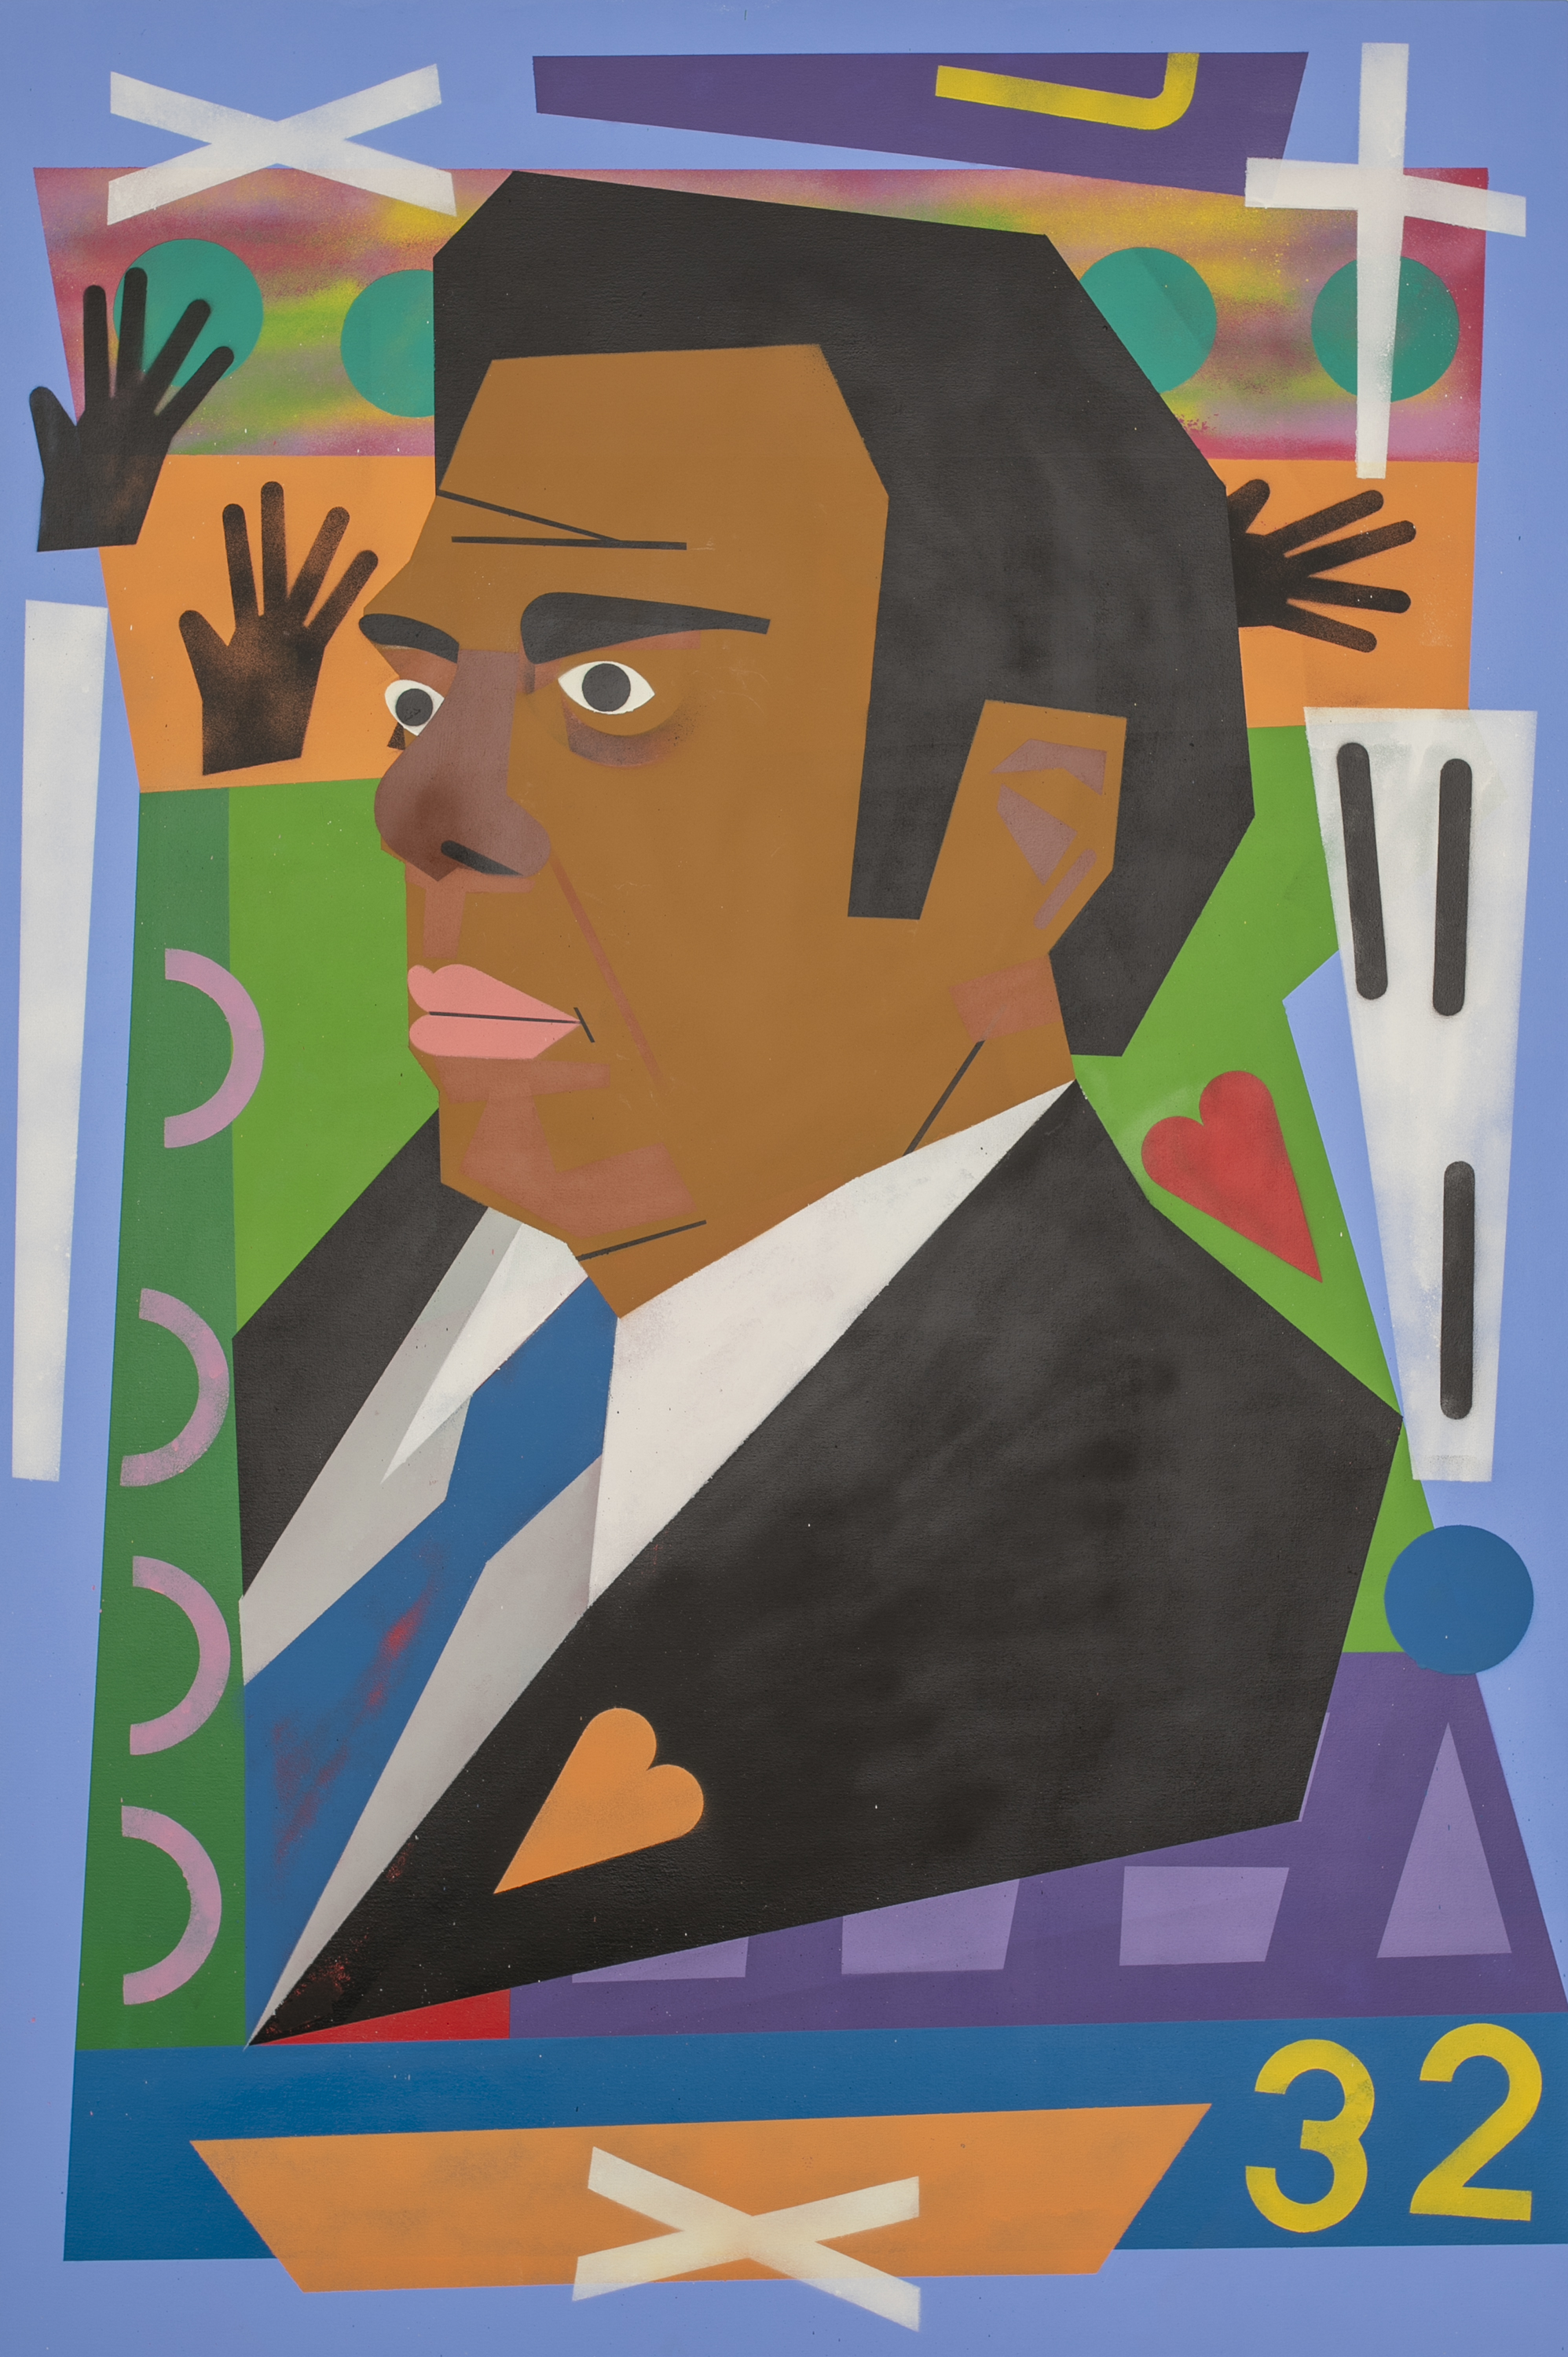 Image: Nina Chanel Abney, “Untitled,” 2018. A portrait of politician Andrew Young. Young is pictured in three-quarters view looking to the left. He wears a black suit and bright blue tie. An orange heart is on the lapel. He is surrounded by brightly colored flat shapes, including hands, a cross, a heart, and the number 32. Image courtesy of the Smithsonian Institution Traveling Exhibition Service, the artist and Jack Shainman Gallery, New York.